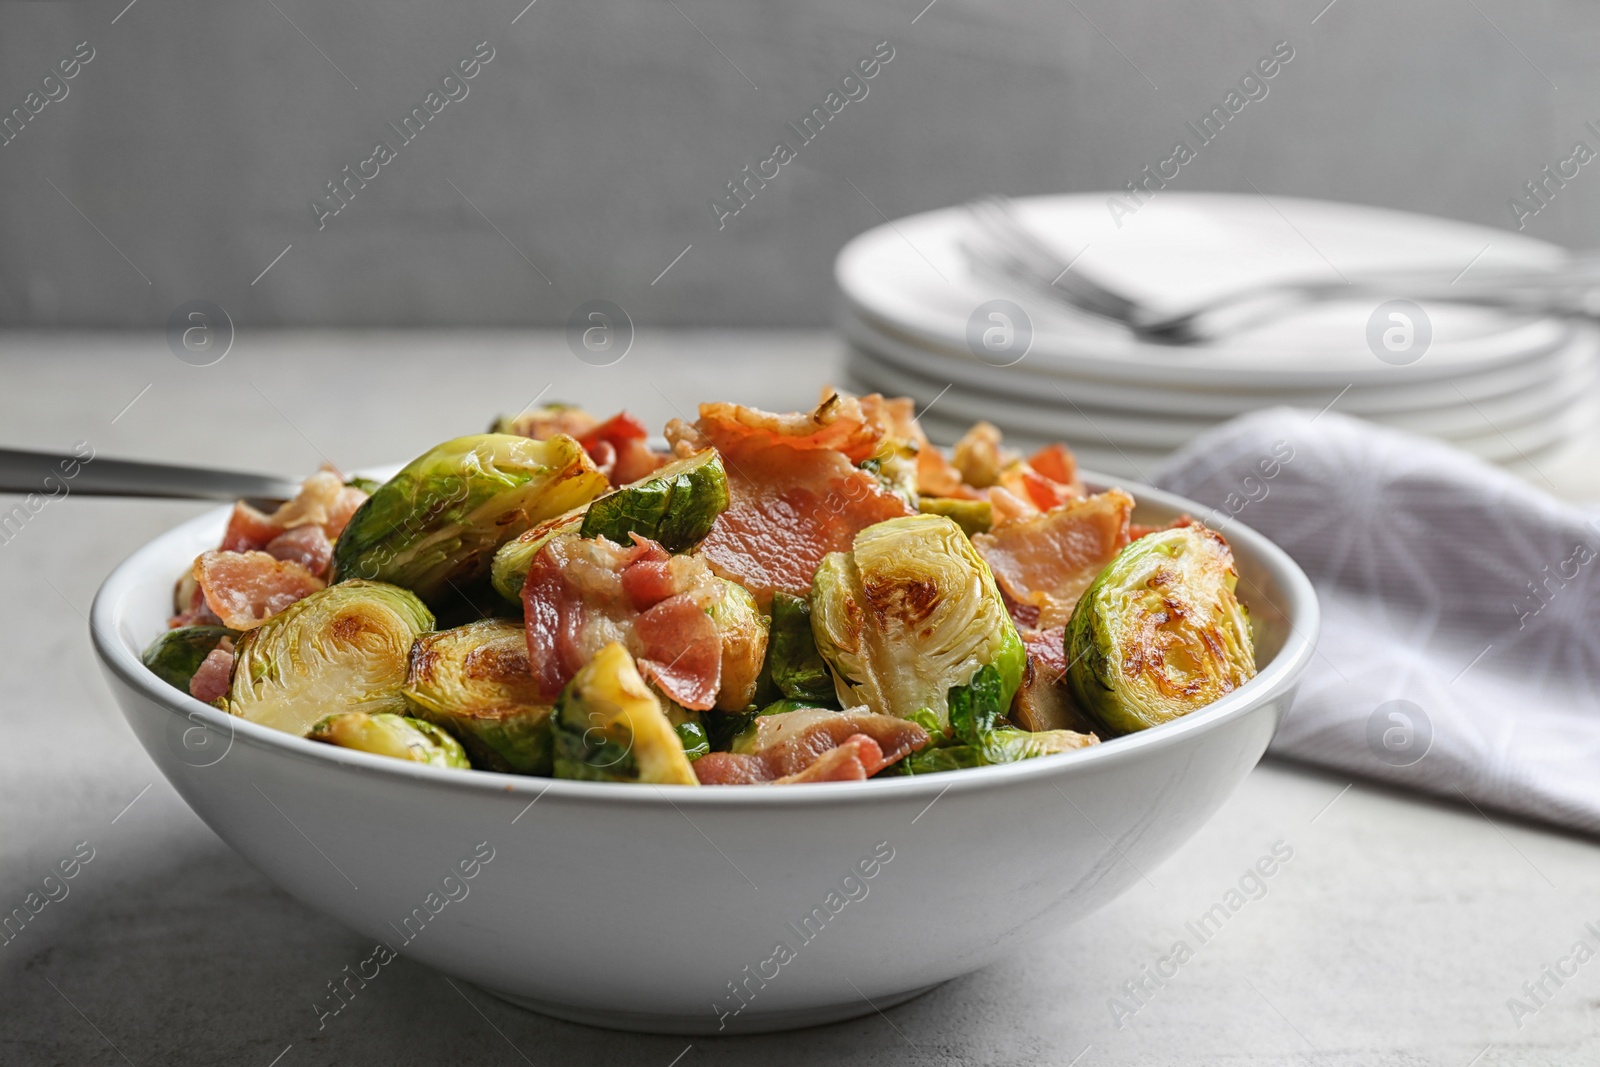 Photo of Delicious roasted Brussels sprouts with bacon served on light grey table